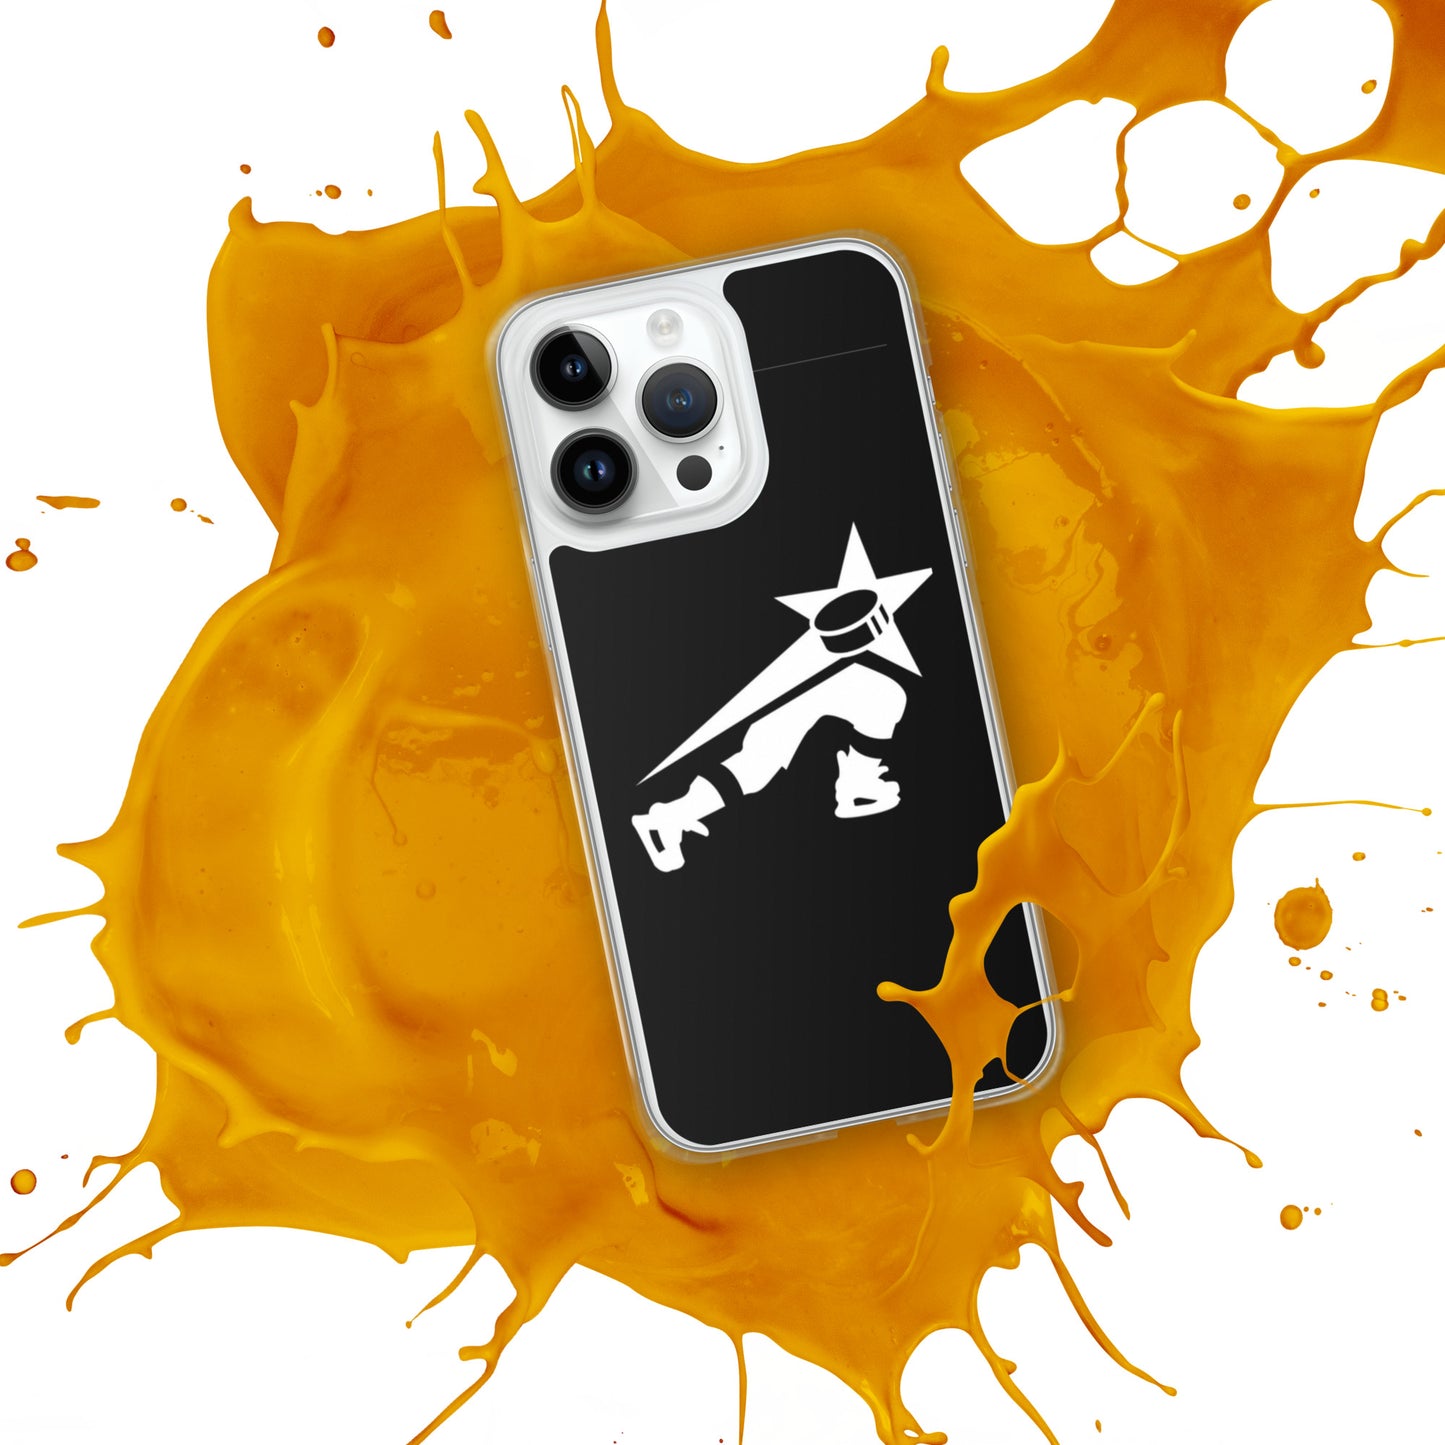 iPhone orange  case featuring a stylized white character with a star head, placed atop a spilled white liquid background